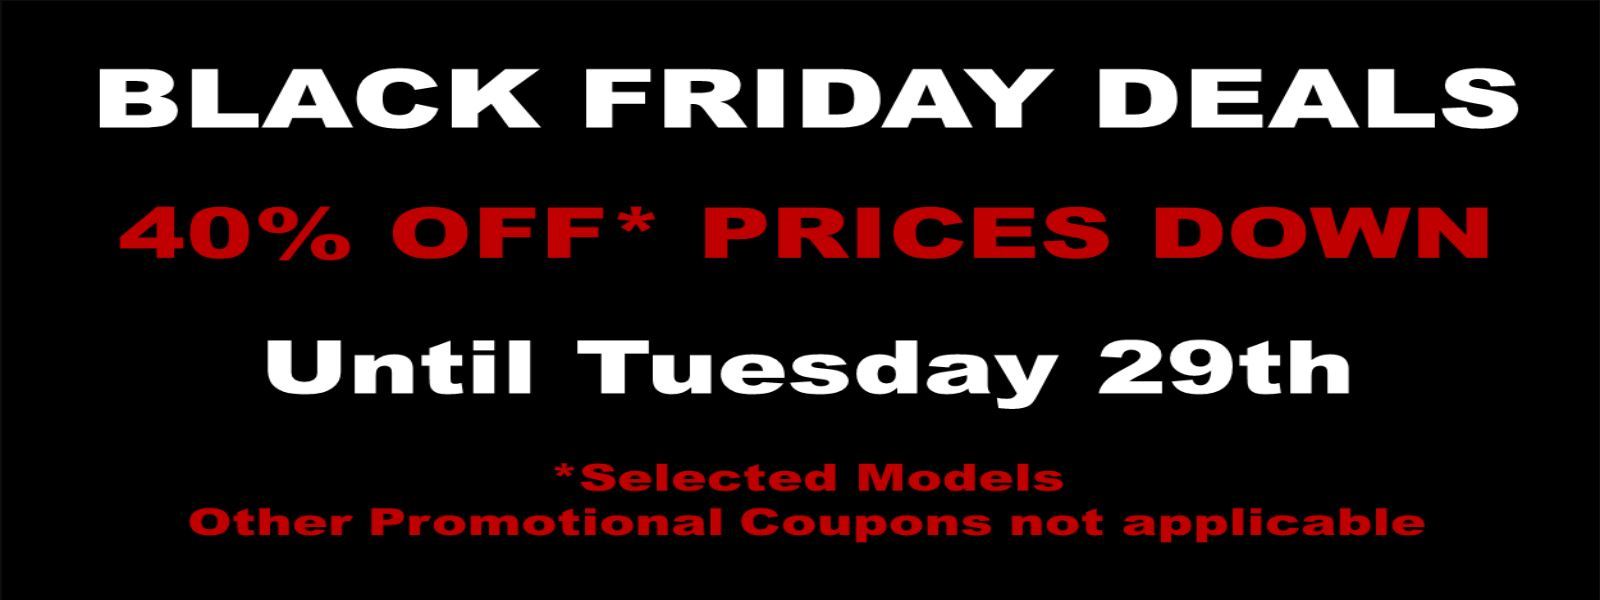 BLACK FRIDAY DEALS - BUY A REAL SEX DOLL